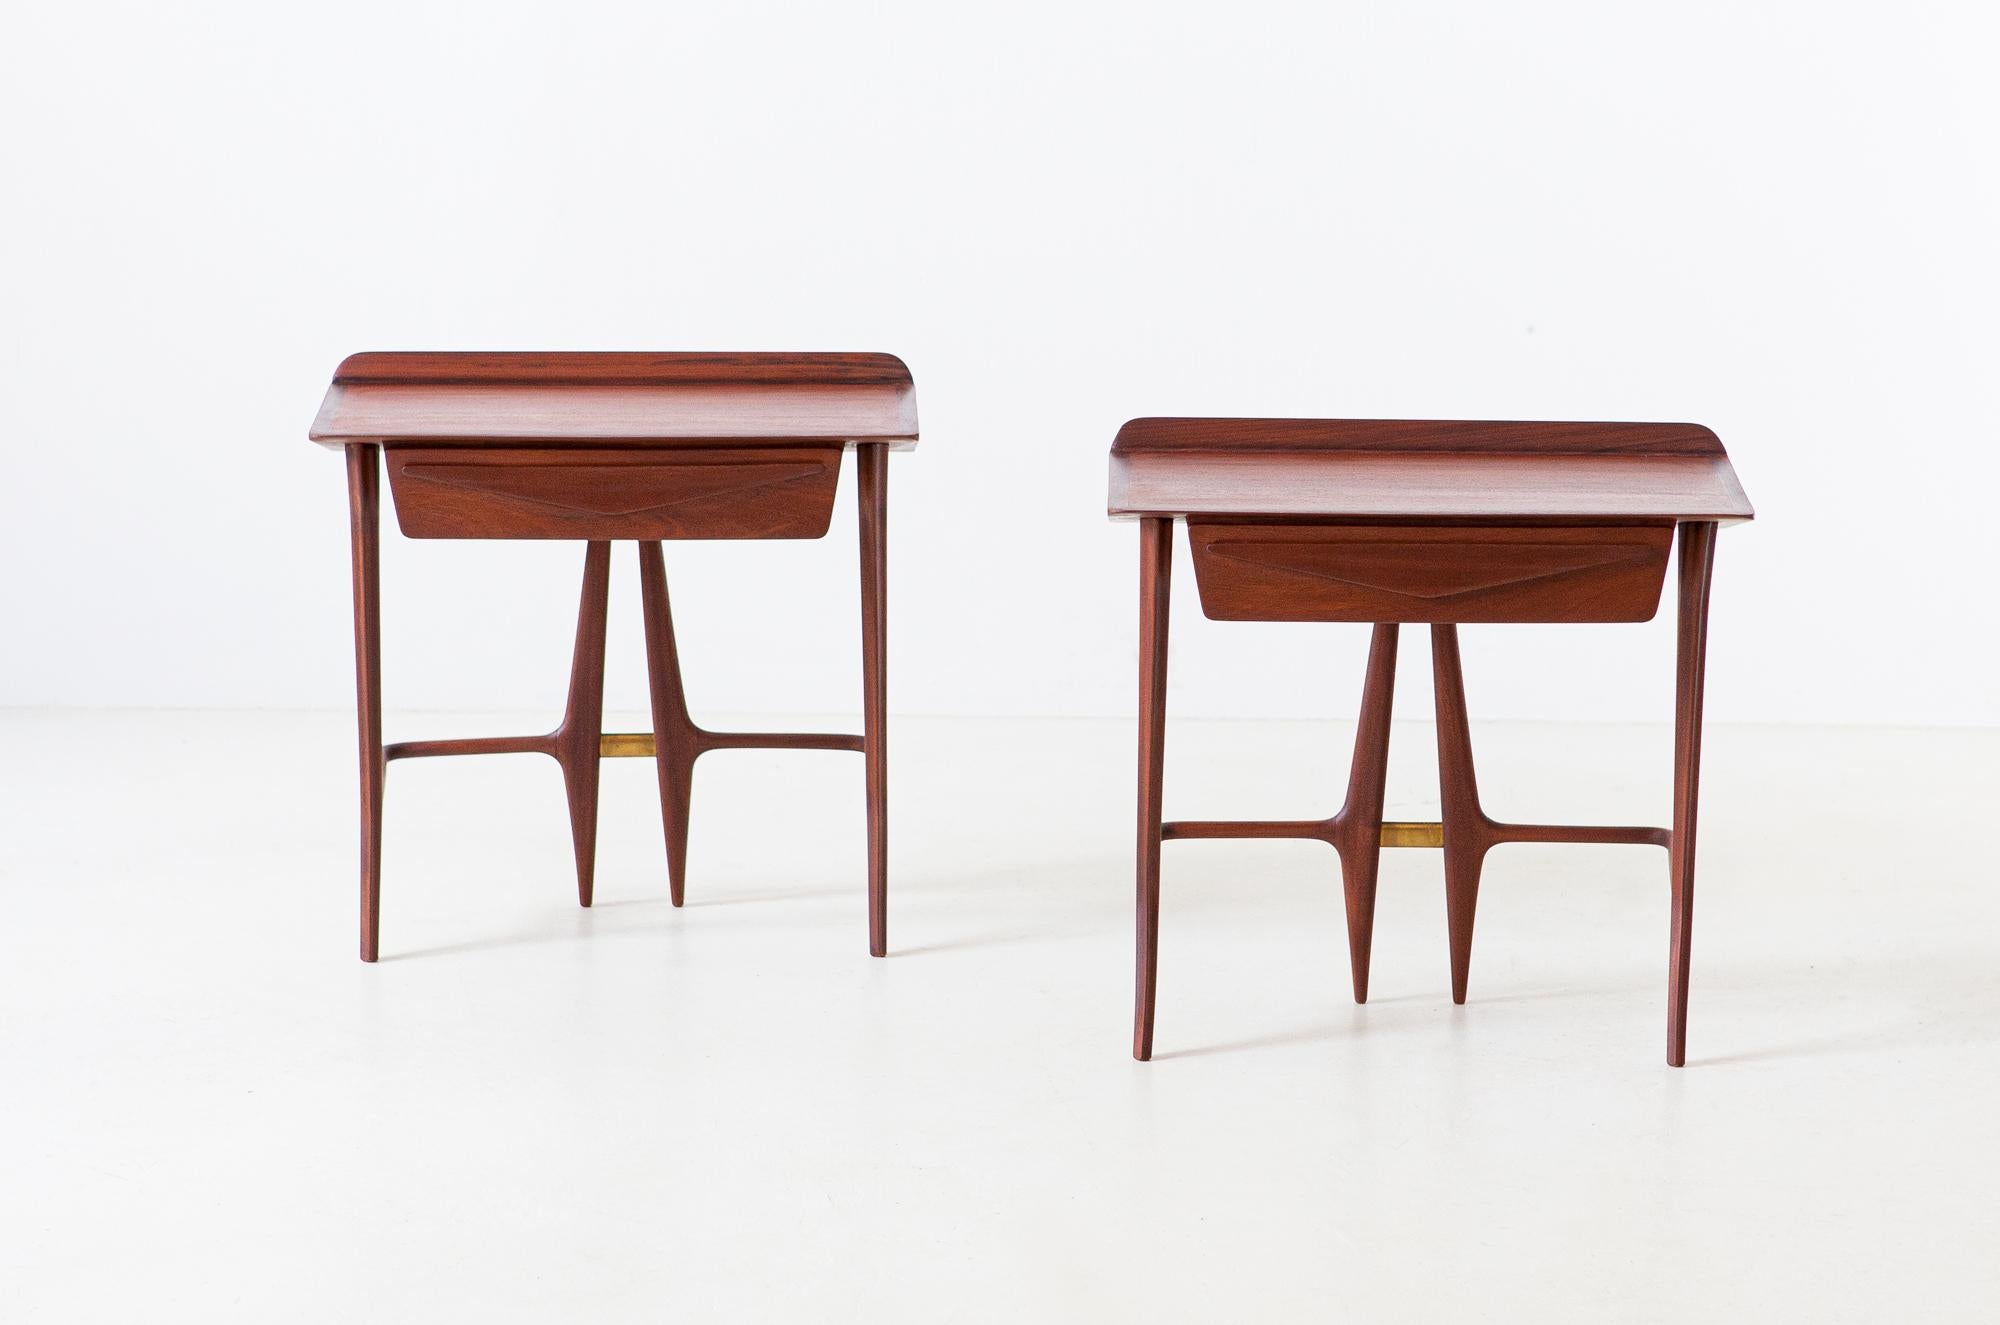 Mid-20th Century Pair of Rare Italian Wooden Bedside Tables, 1950s